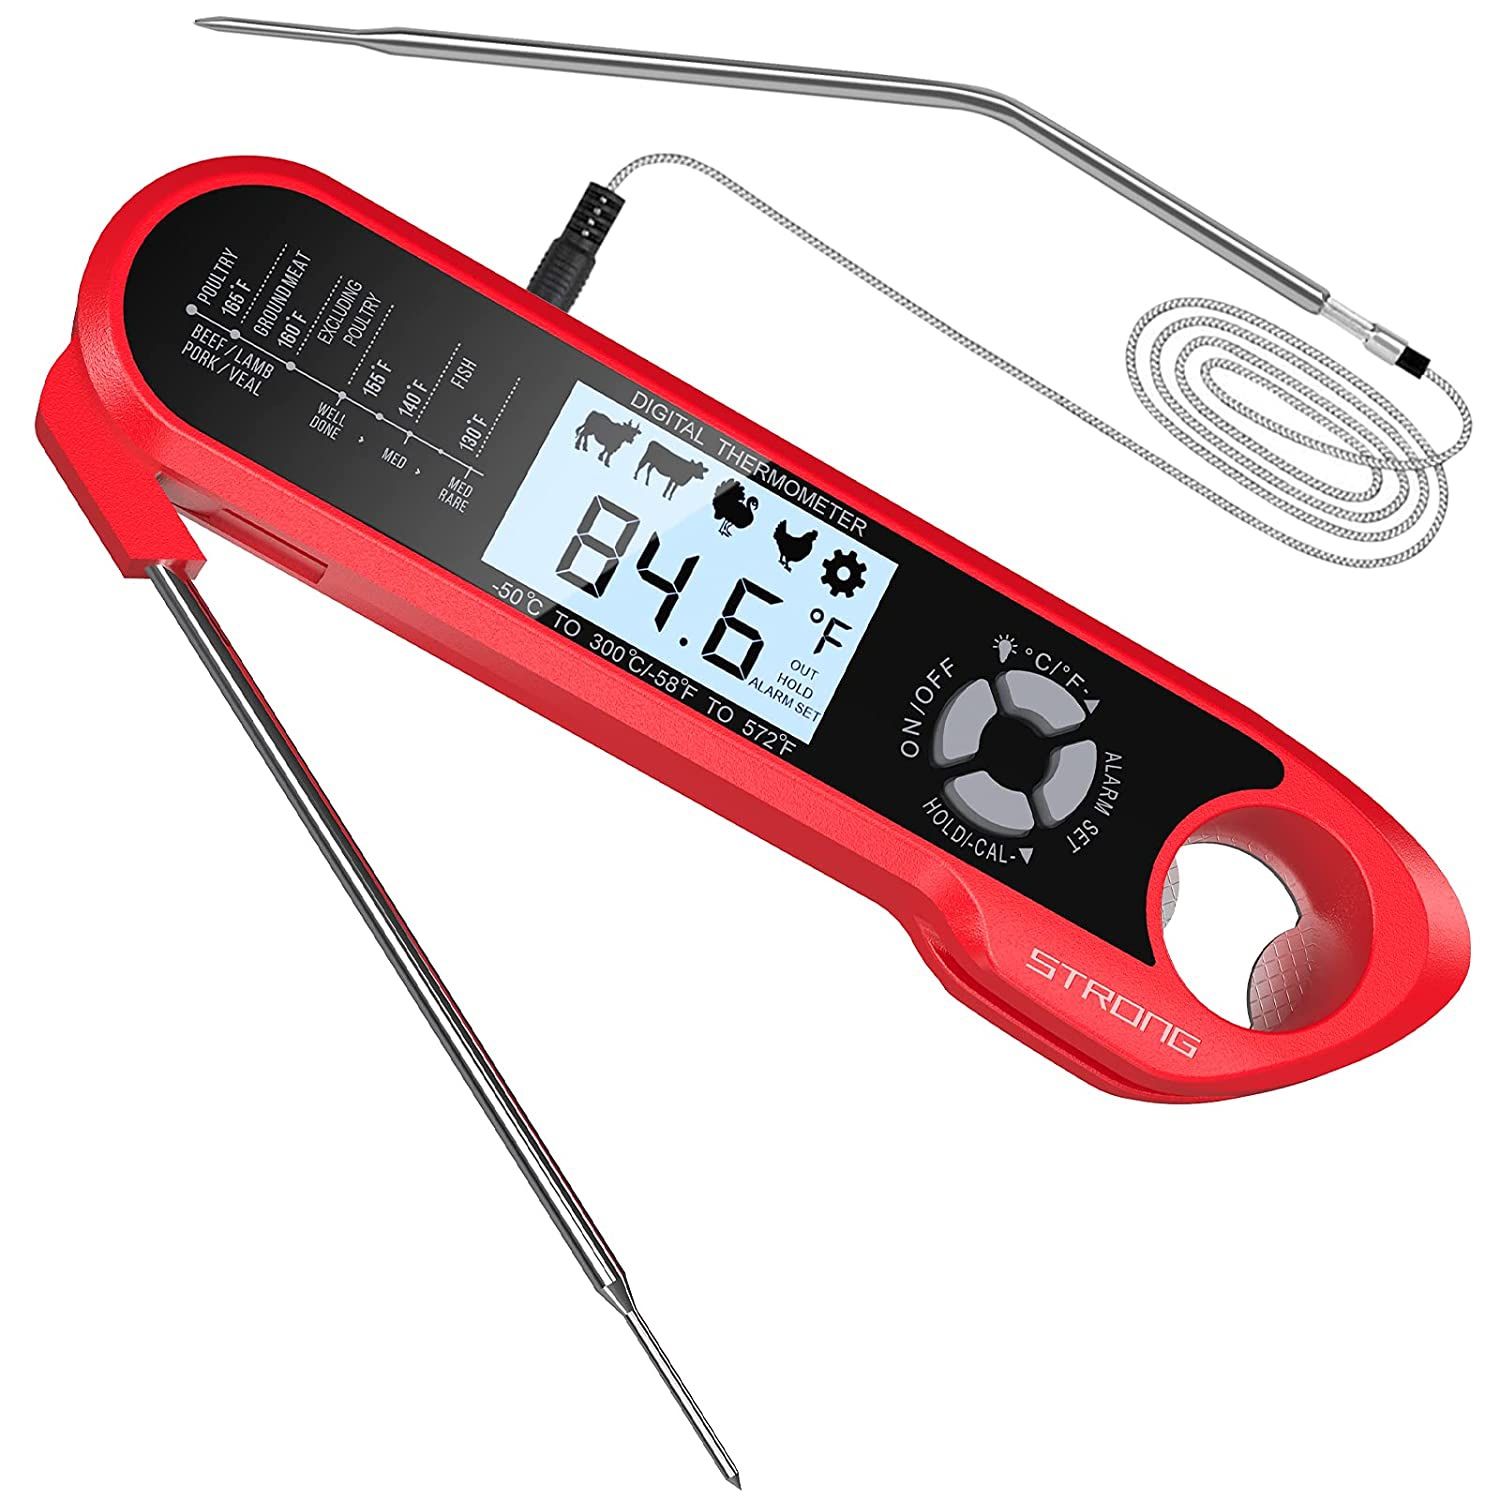 Meat Thermometer, DecorStar Dual Probe Food Thermometer with Backlight & Calibration, Digital Instant Read Meat Thermometer for Kitchen, Food Cooking,